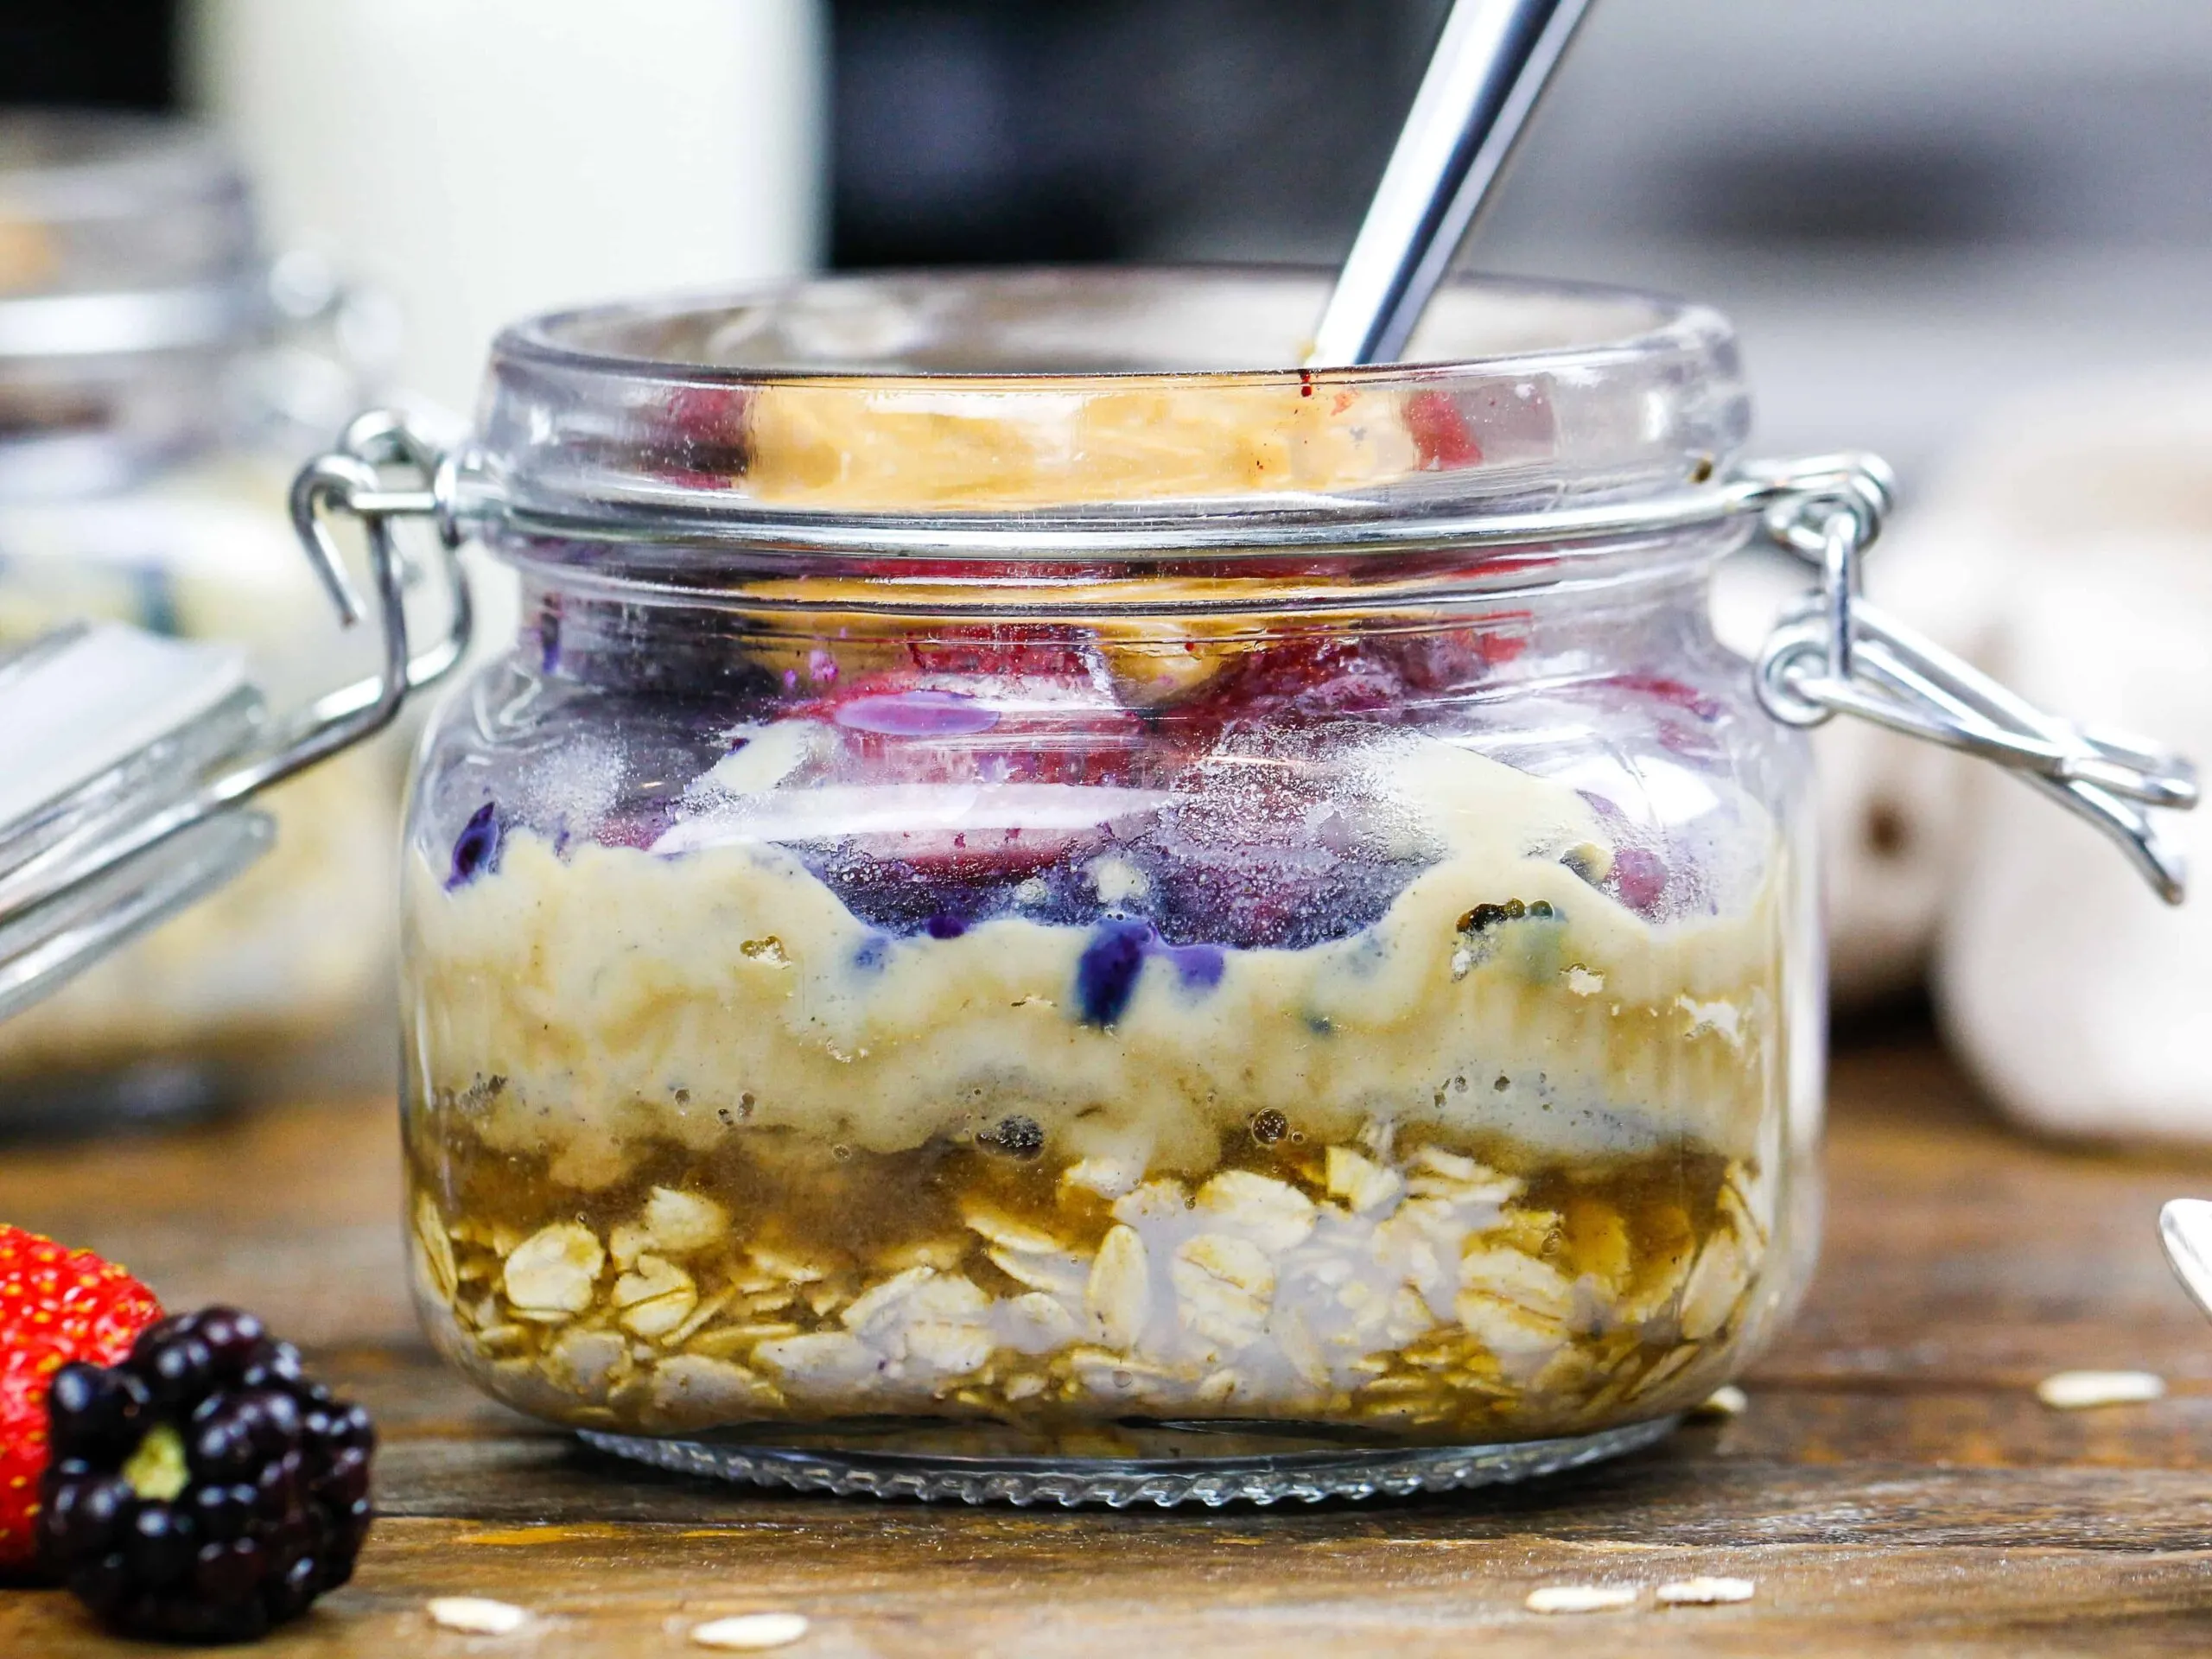 image of overnight oats made with berries and peanut butter